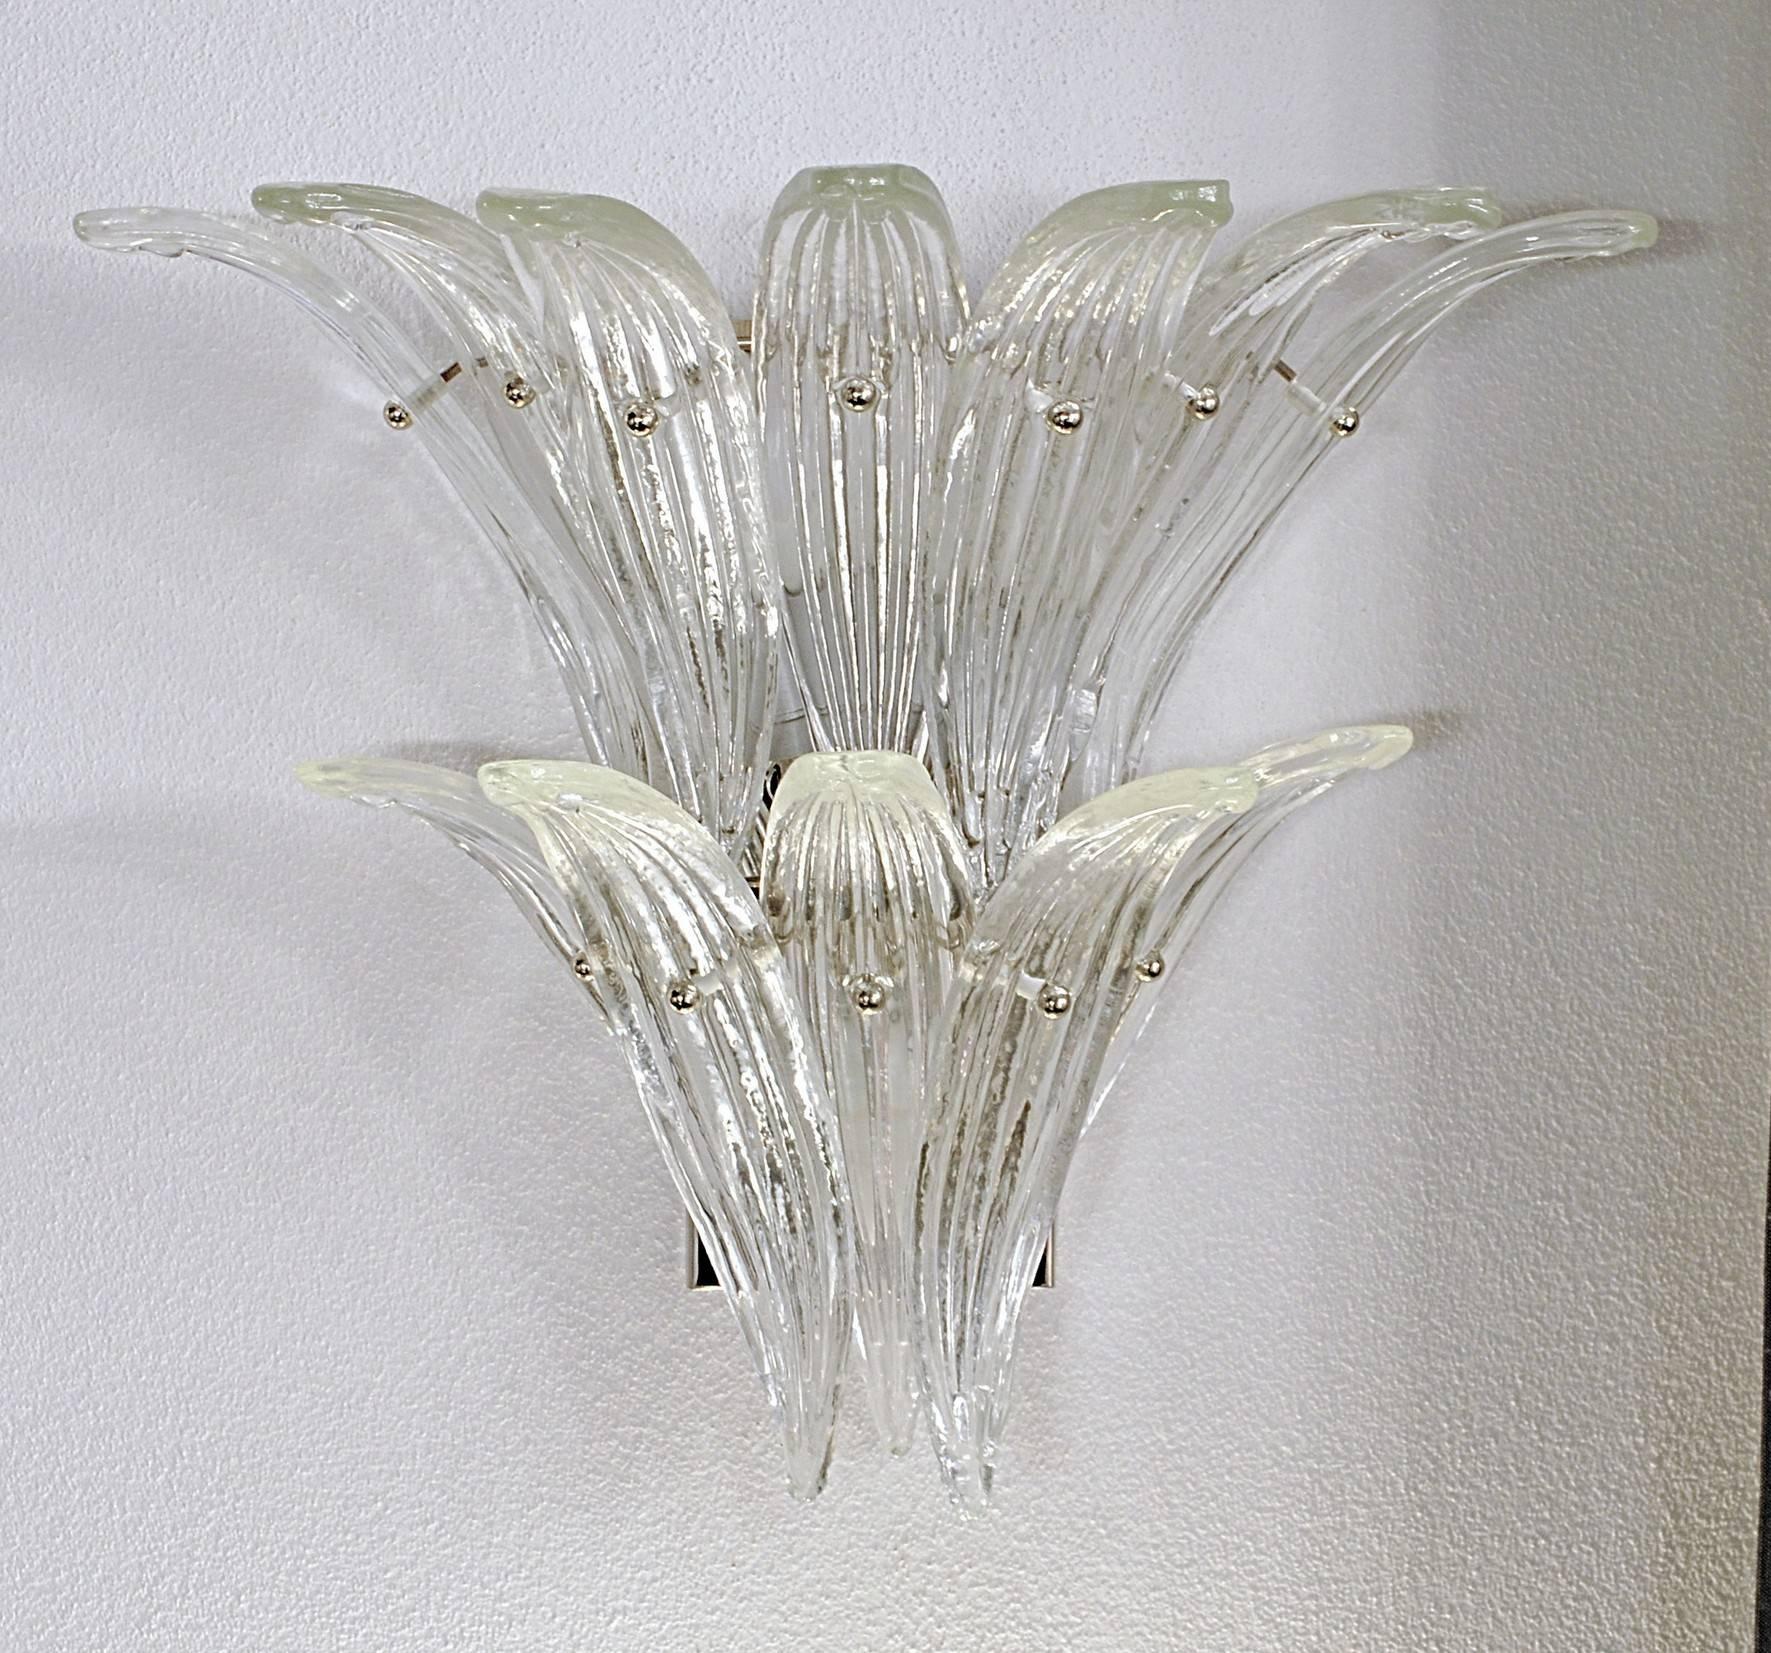 Four charming palmette sconces. Each carry 12 palmette leaves and three candelabra socket. Clear glass, chrome hardware.

Identifications, references: Unknown origin. Other sellers are quoting it as Barovier or Venini. Probably the first is more